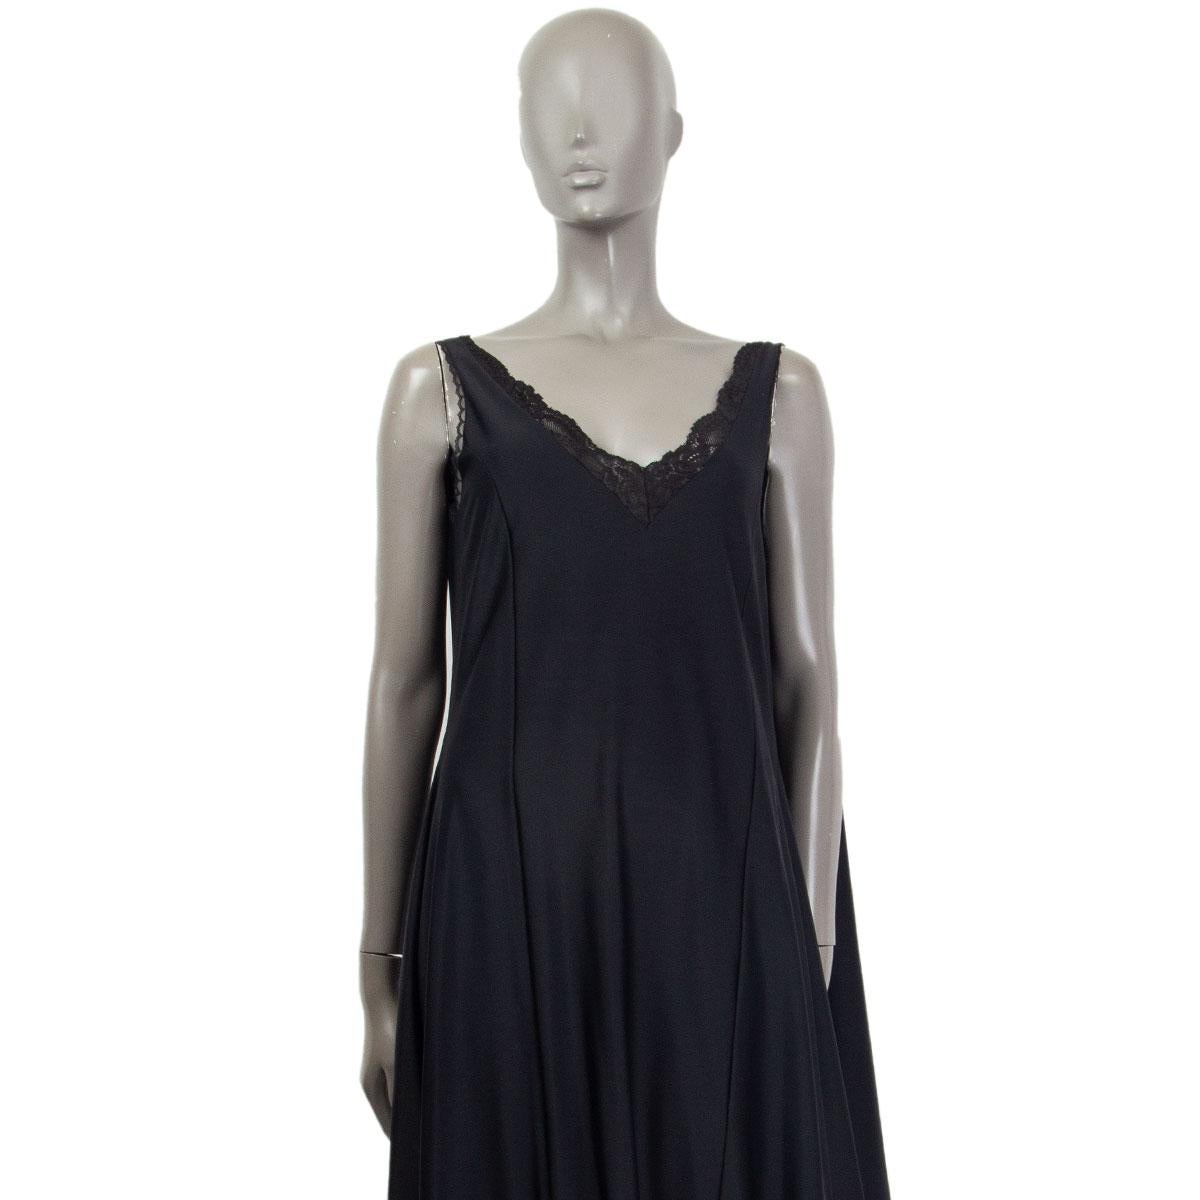 100% authentic Vetements lingerie wrap sleeveless mid-length dress in black stretch jersey, polyamide (82%) and elastane (18%). Tonal lace trim throughout. Integrated shawl-style panel to wrap around. Closes with a zipper on the left side. Unlined.